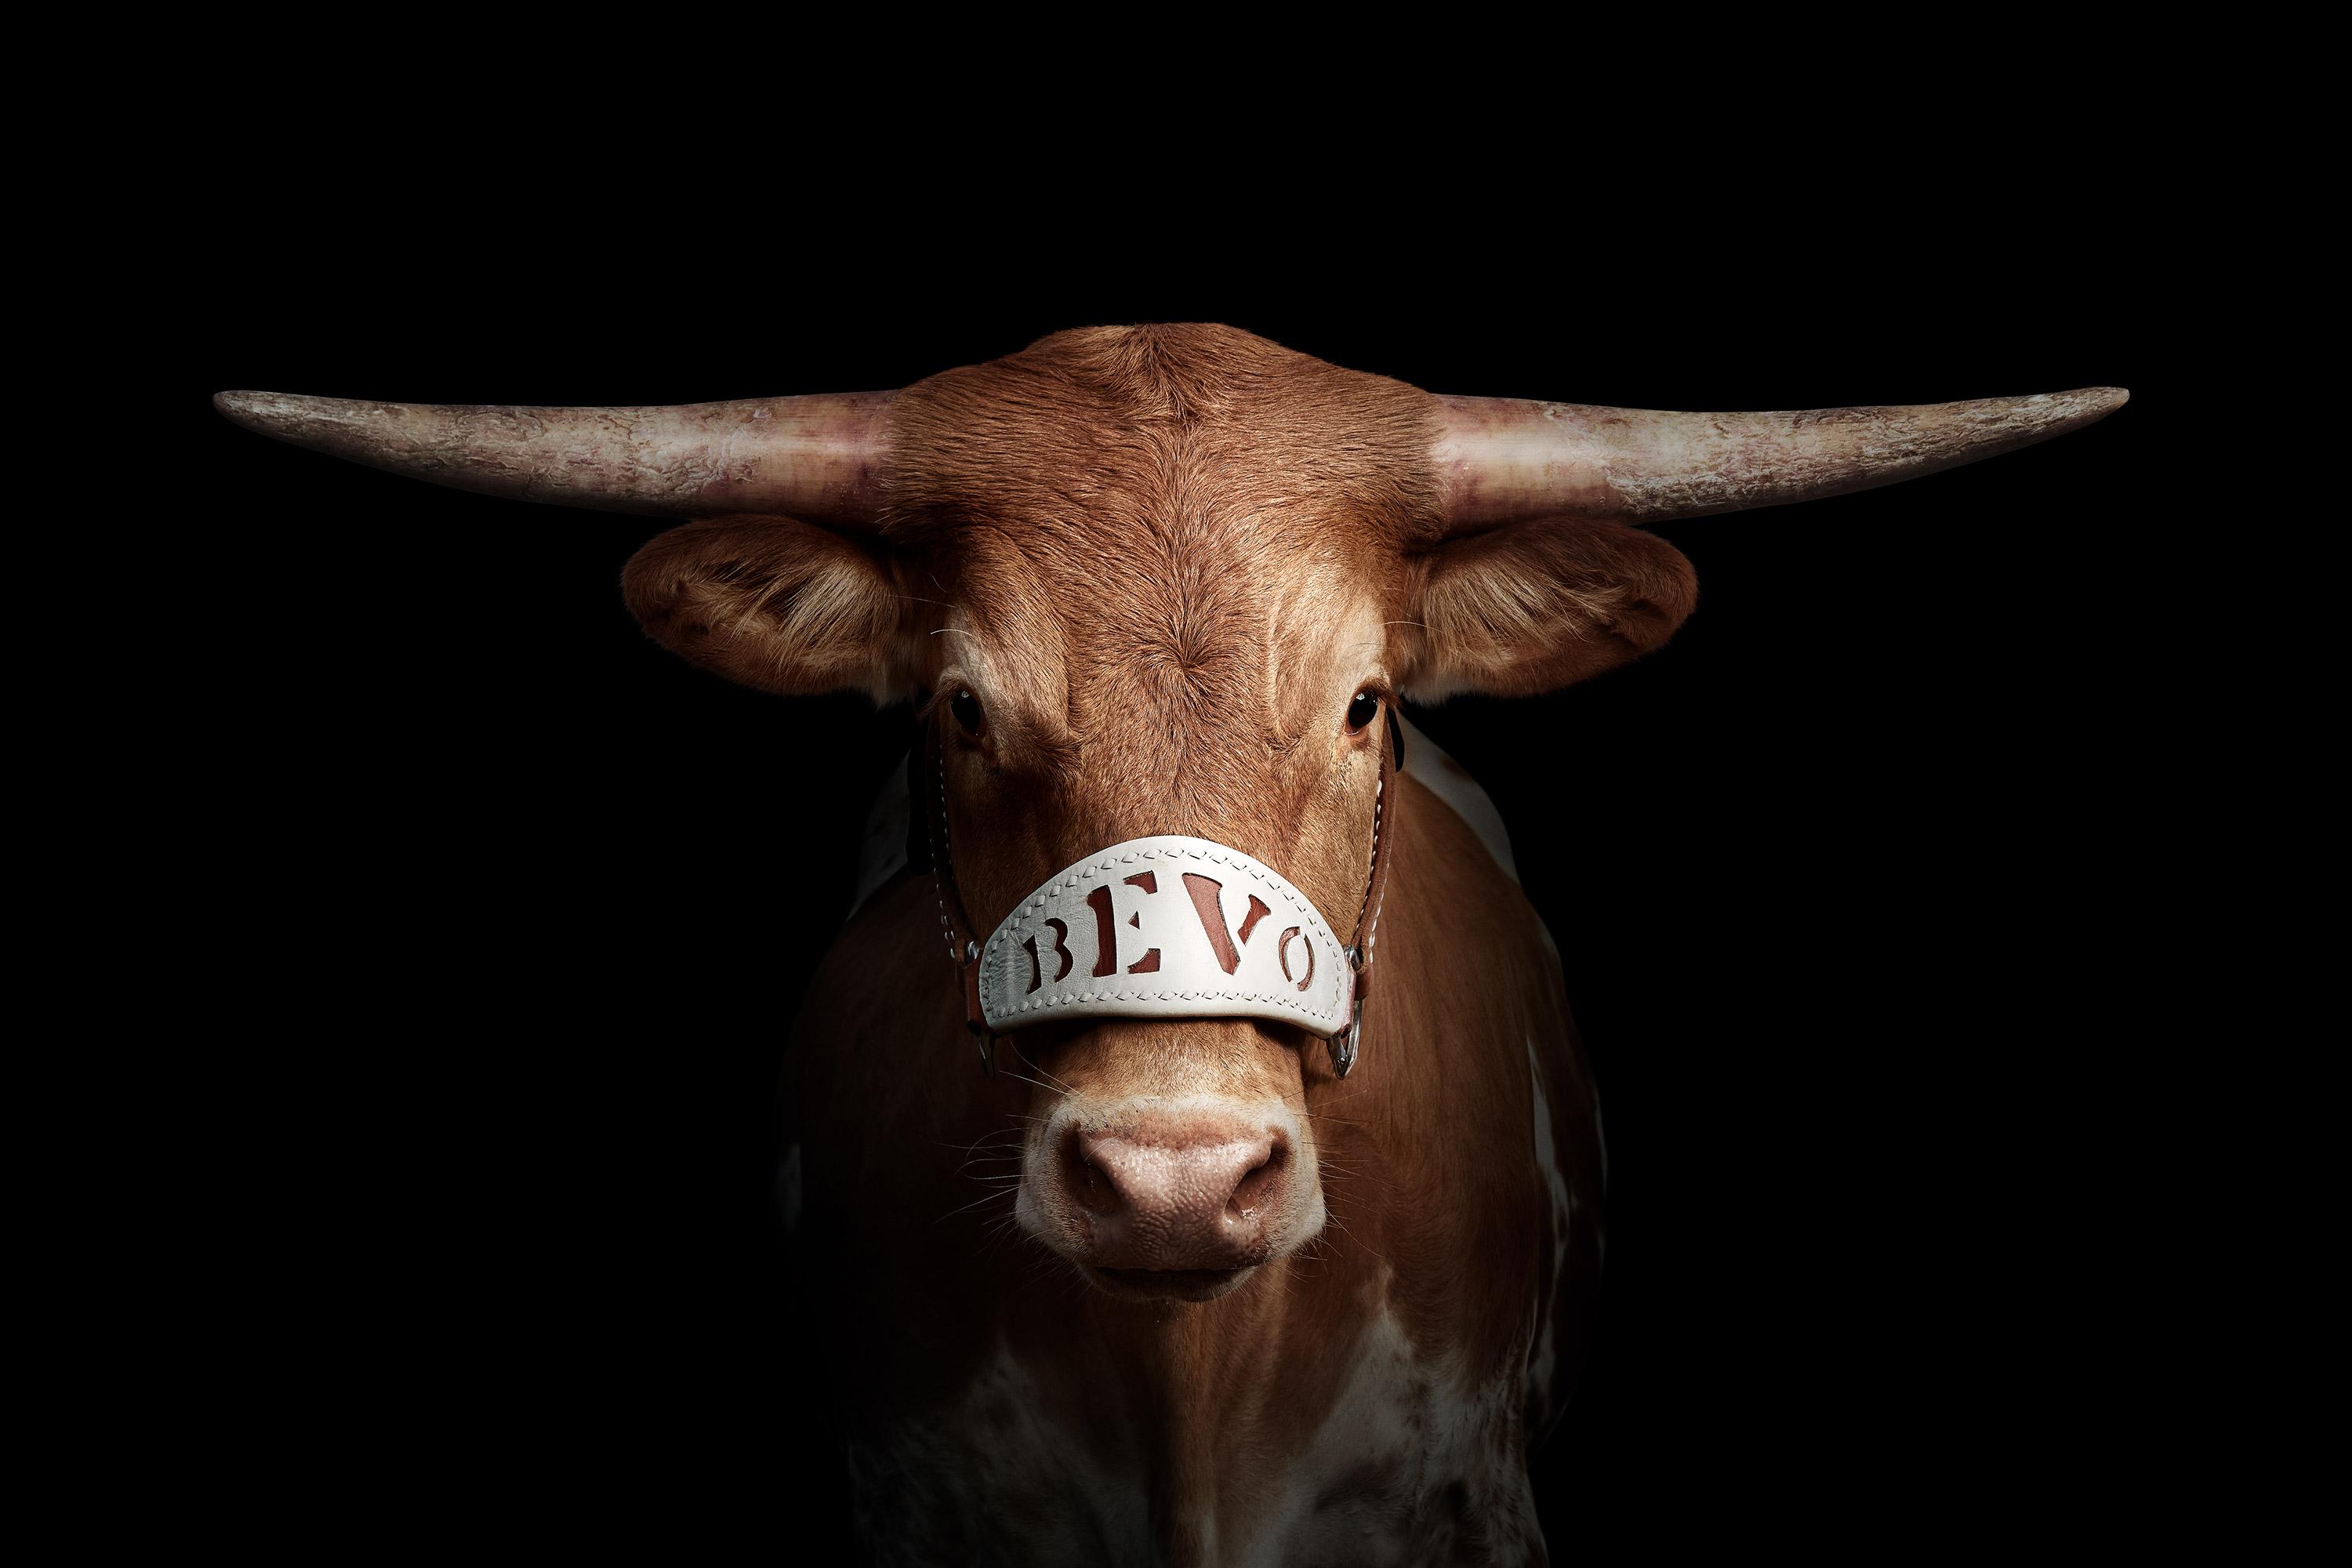 Randal Ford - Bevo XV Black, Photography 2018, Printed After